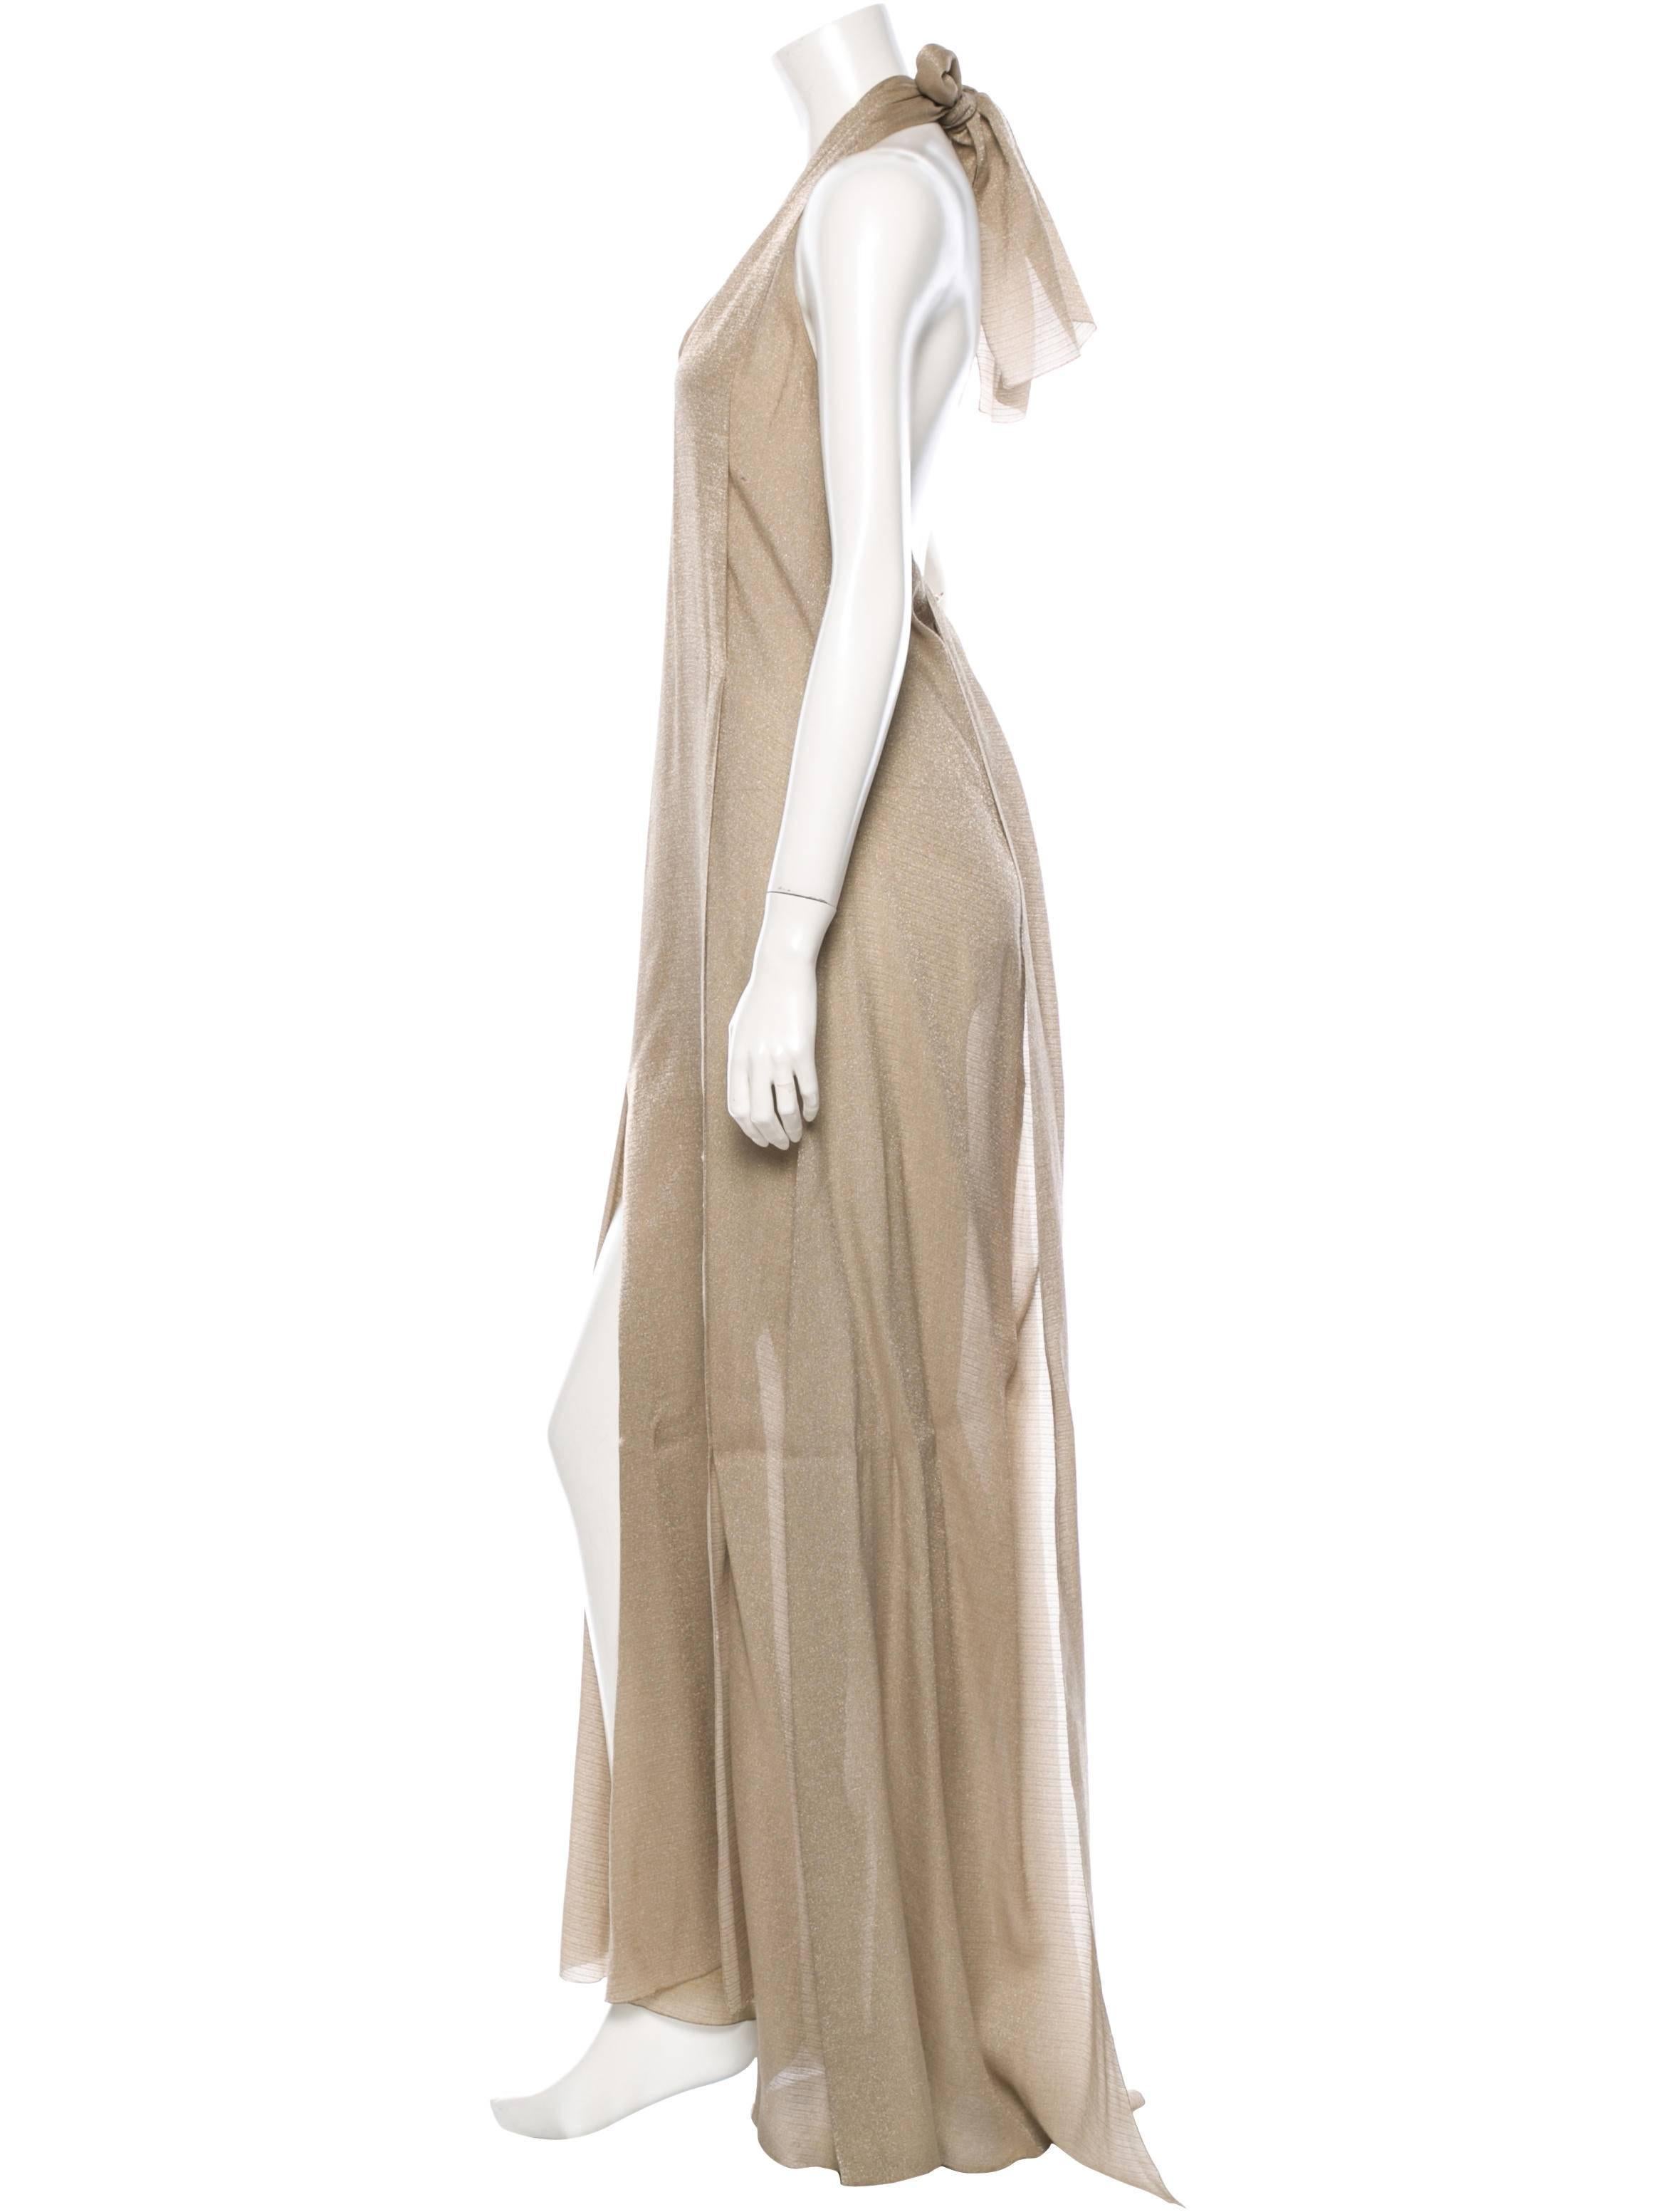 CURATOR'S NOTES

Wedding season is upon us1  Be the best dressed guest decked out in this gorgeous Chanel halter dress featuring V-neckline, hem slits, back sash ties and back concealed zip closure. 

Size FR 42 (US 10)
Bust 38”
Waist 42”
Hip